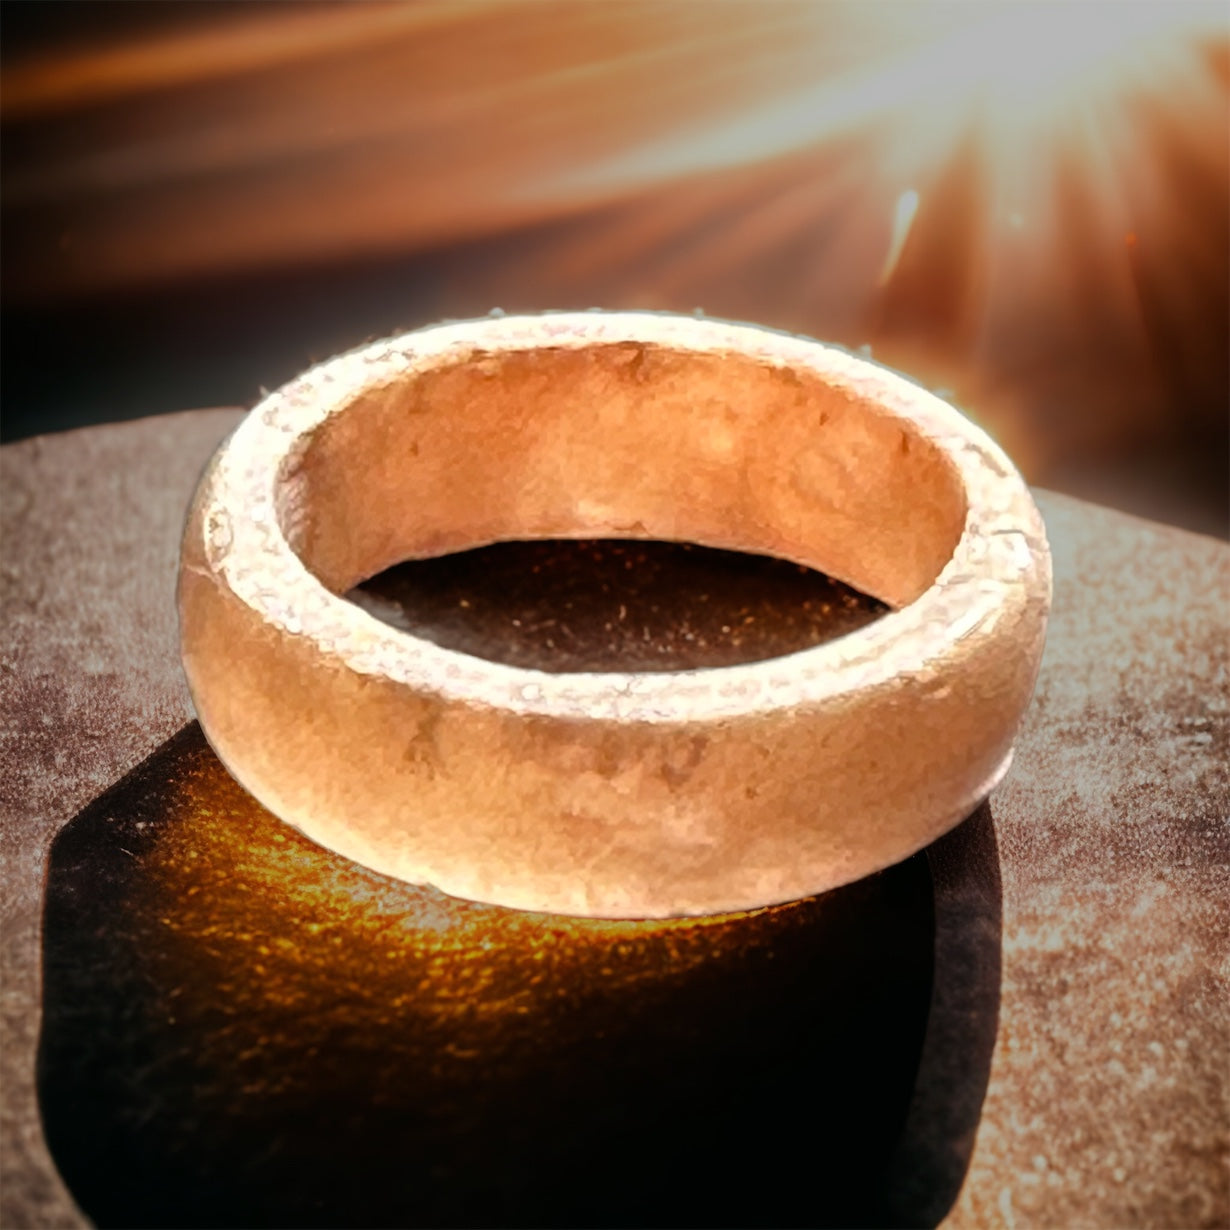 Ashes Cremation Ring, Resin Band, Rustic and Simple Cremation Ring